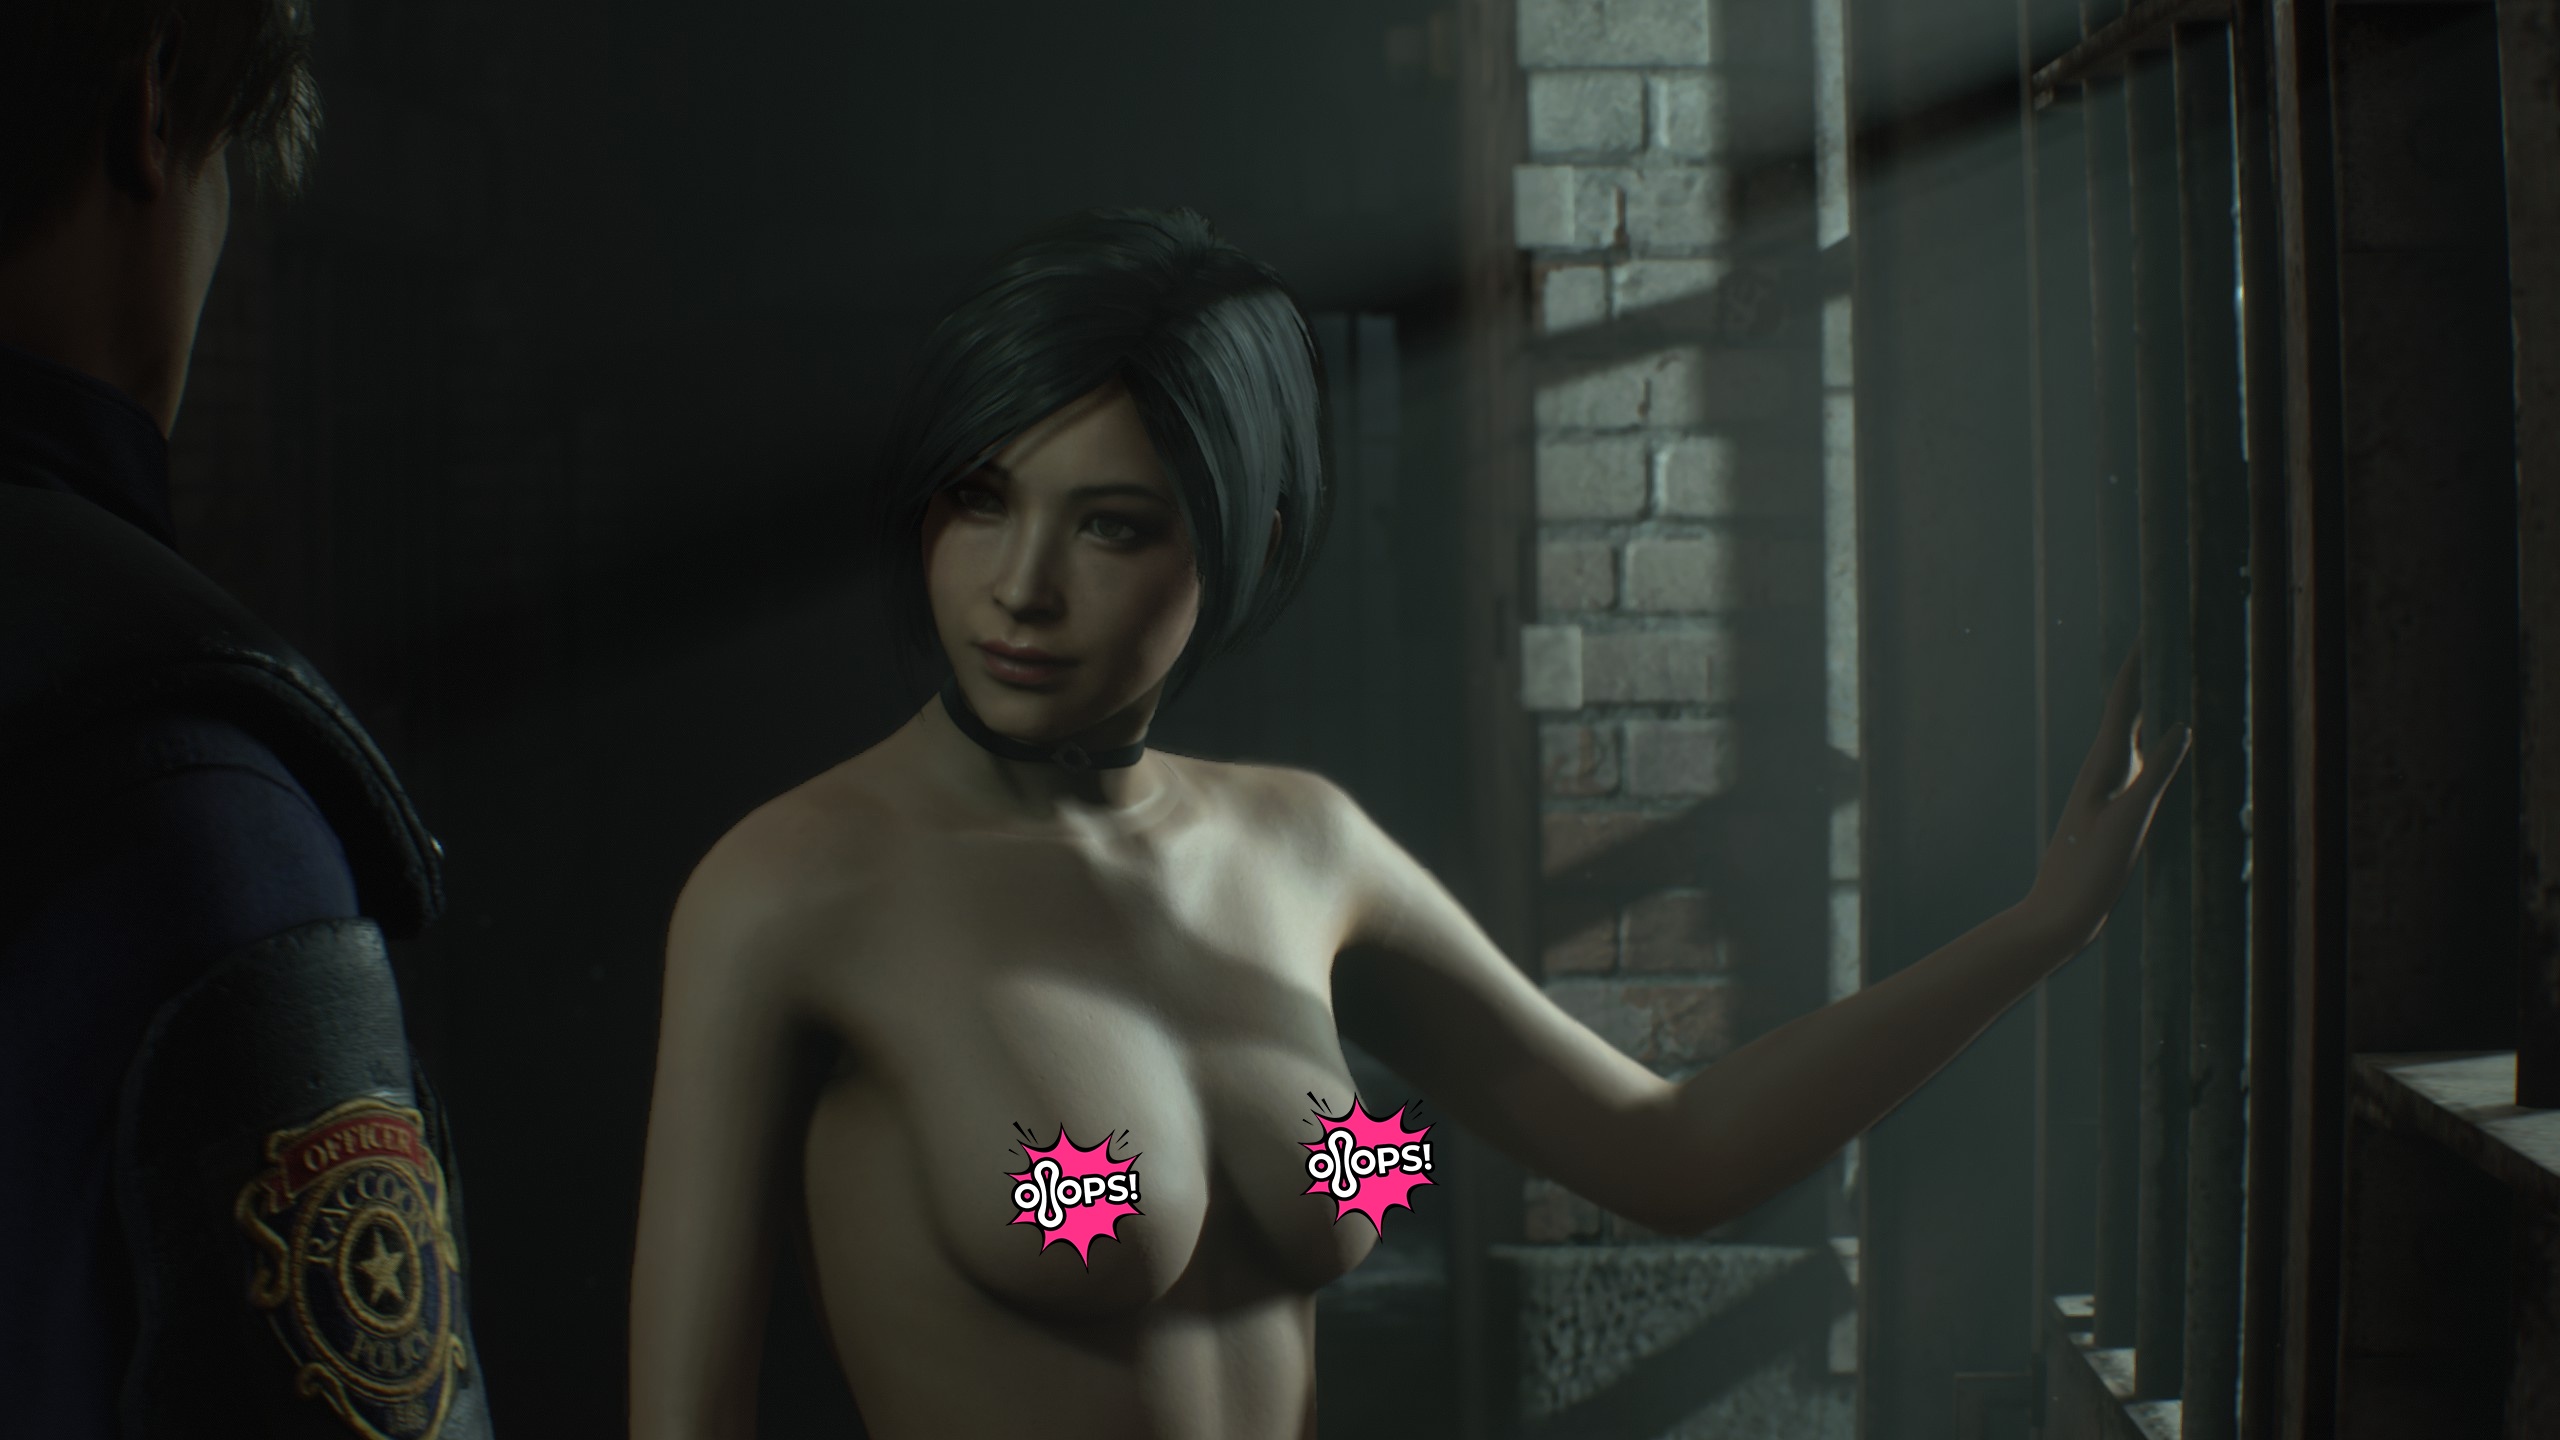 Brace yourself for these hot ada wong nude mod captures